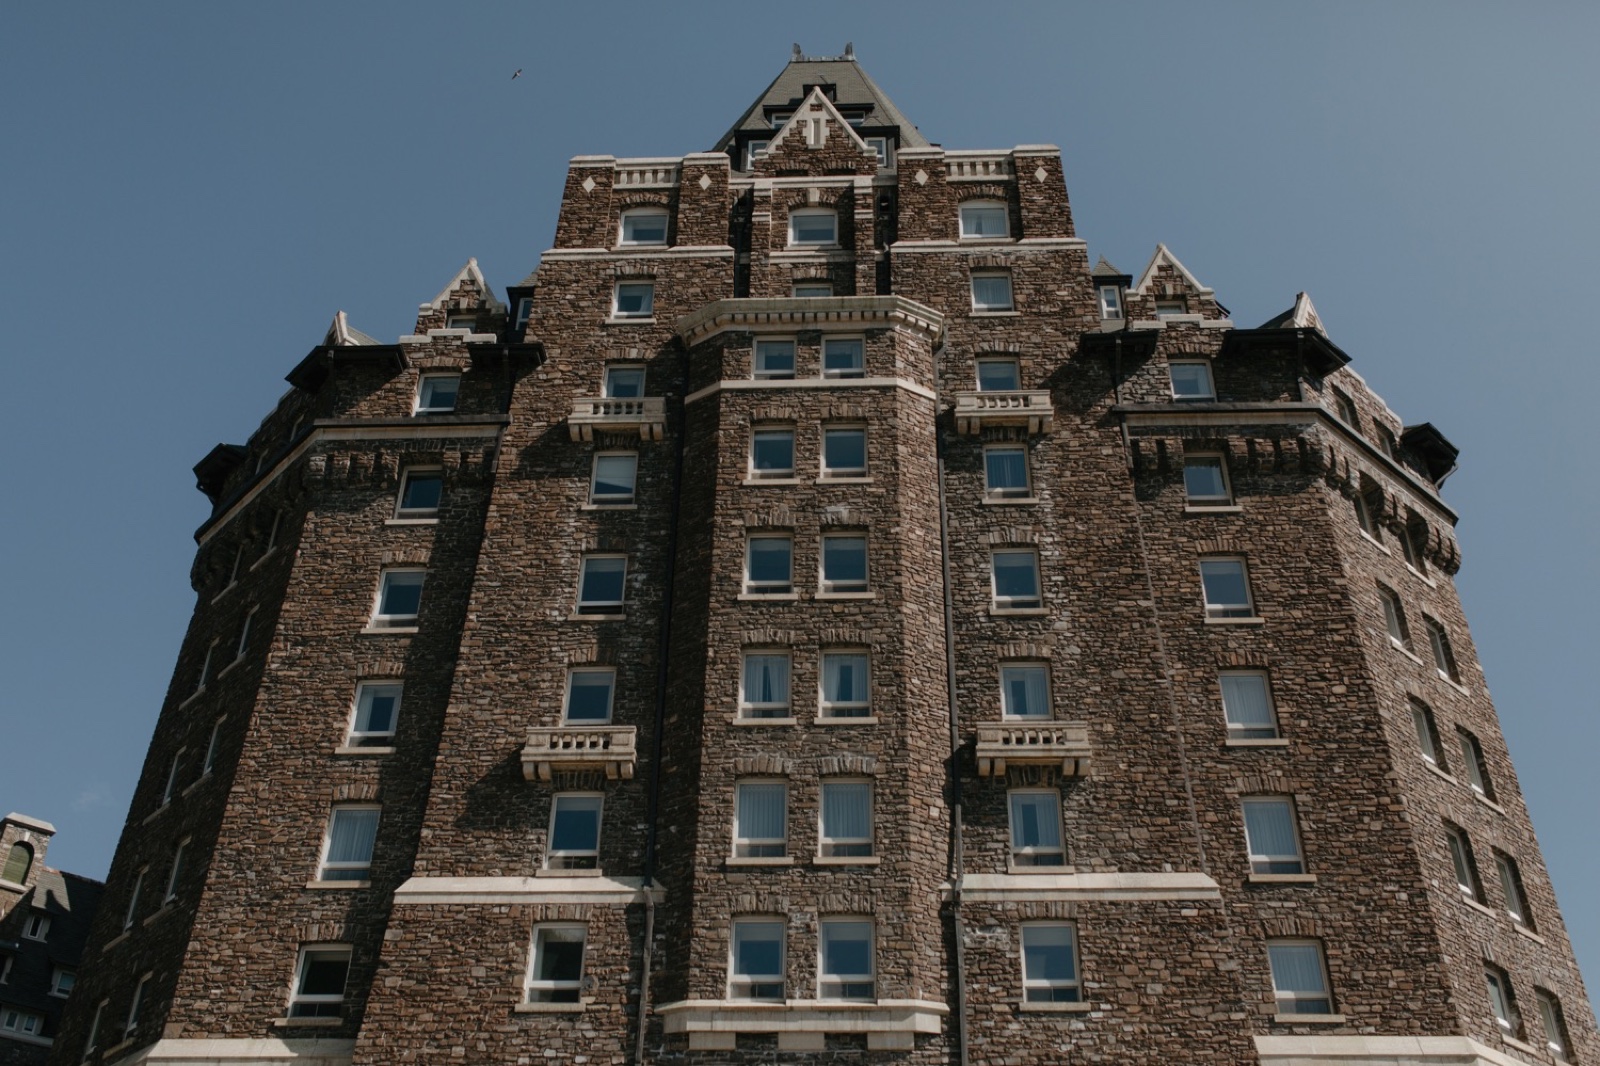 Fairmont Banff Springs as the perfect castle wedding in the Canadian Rockies